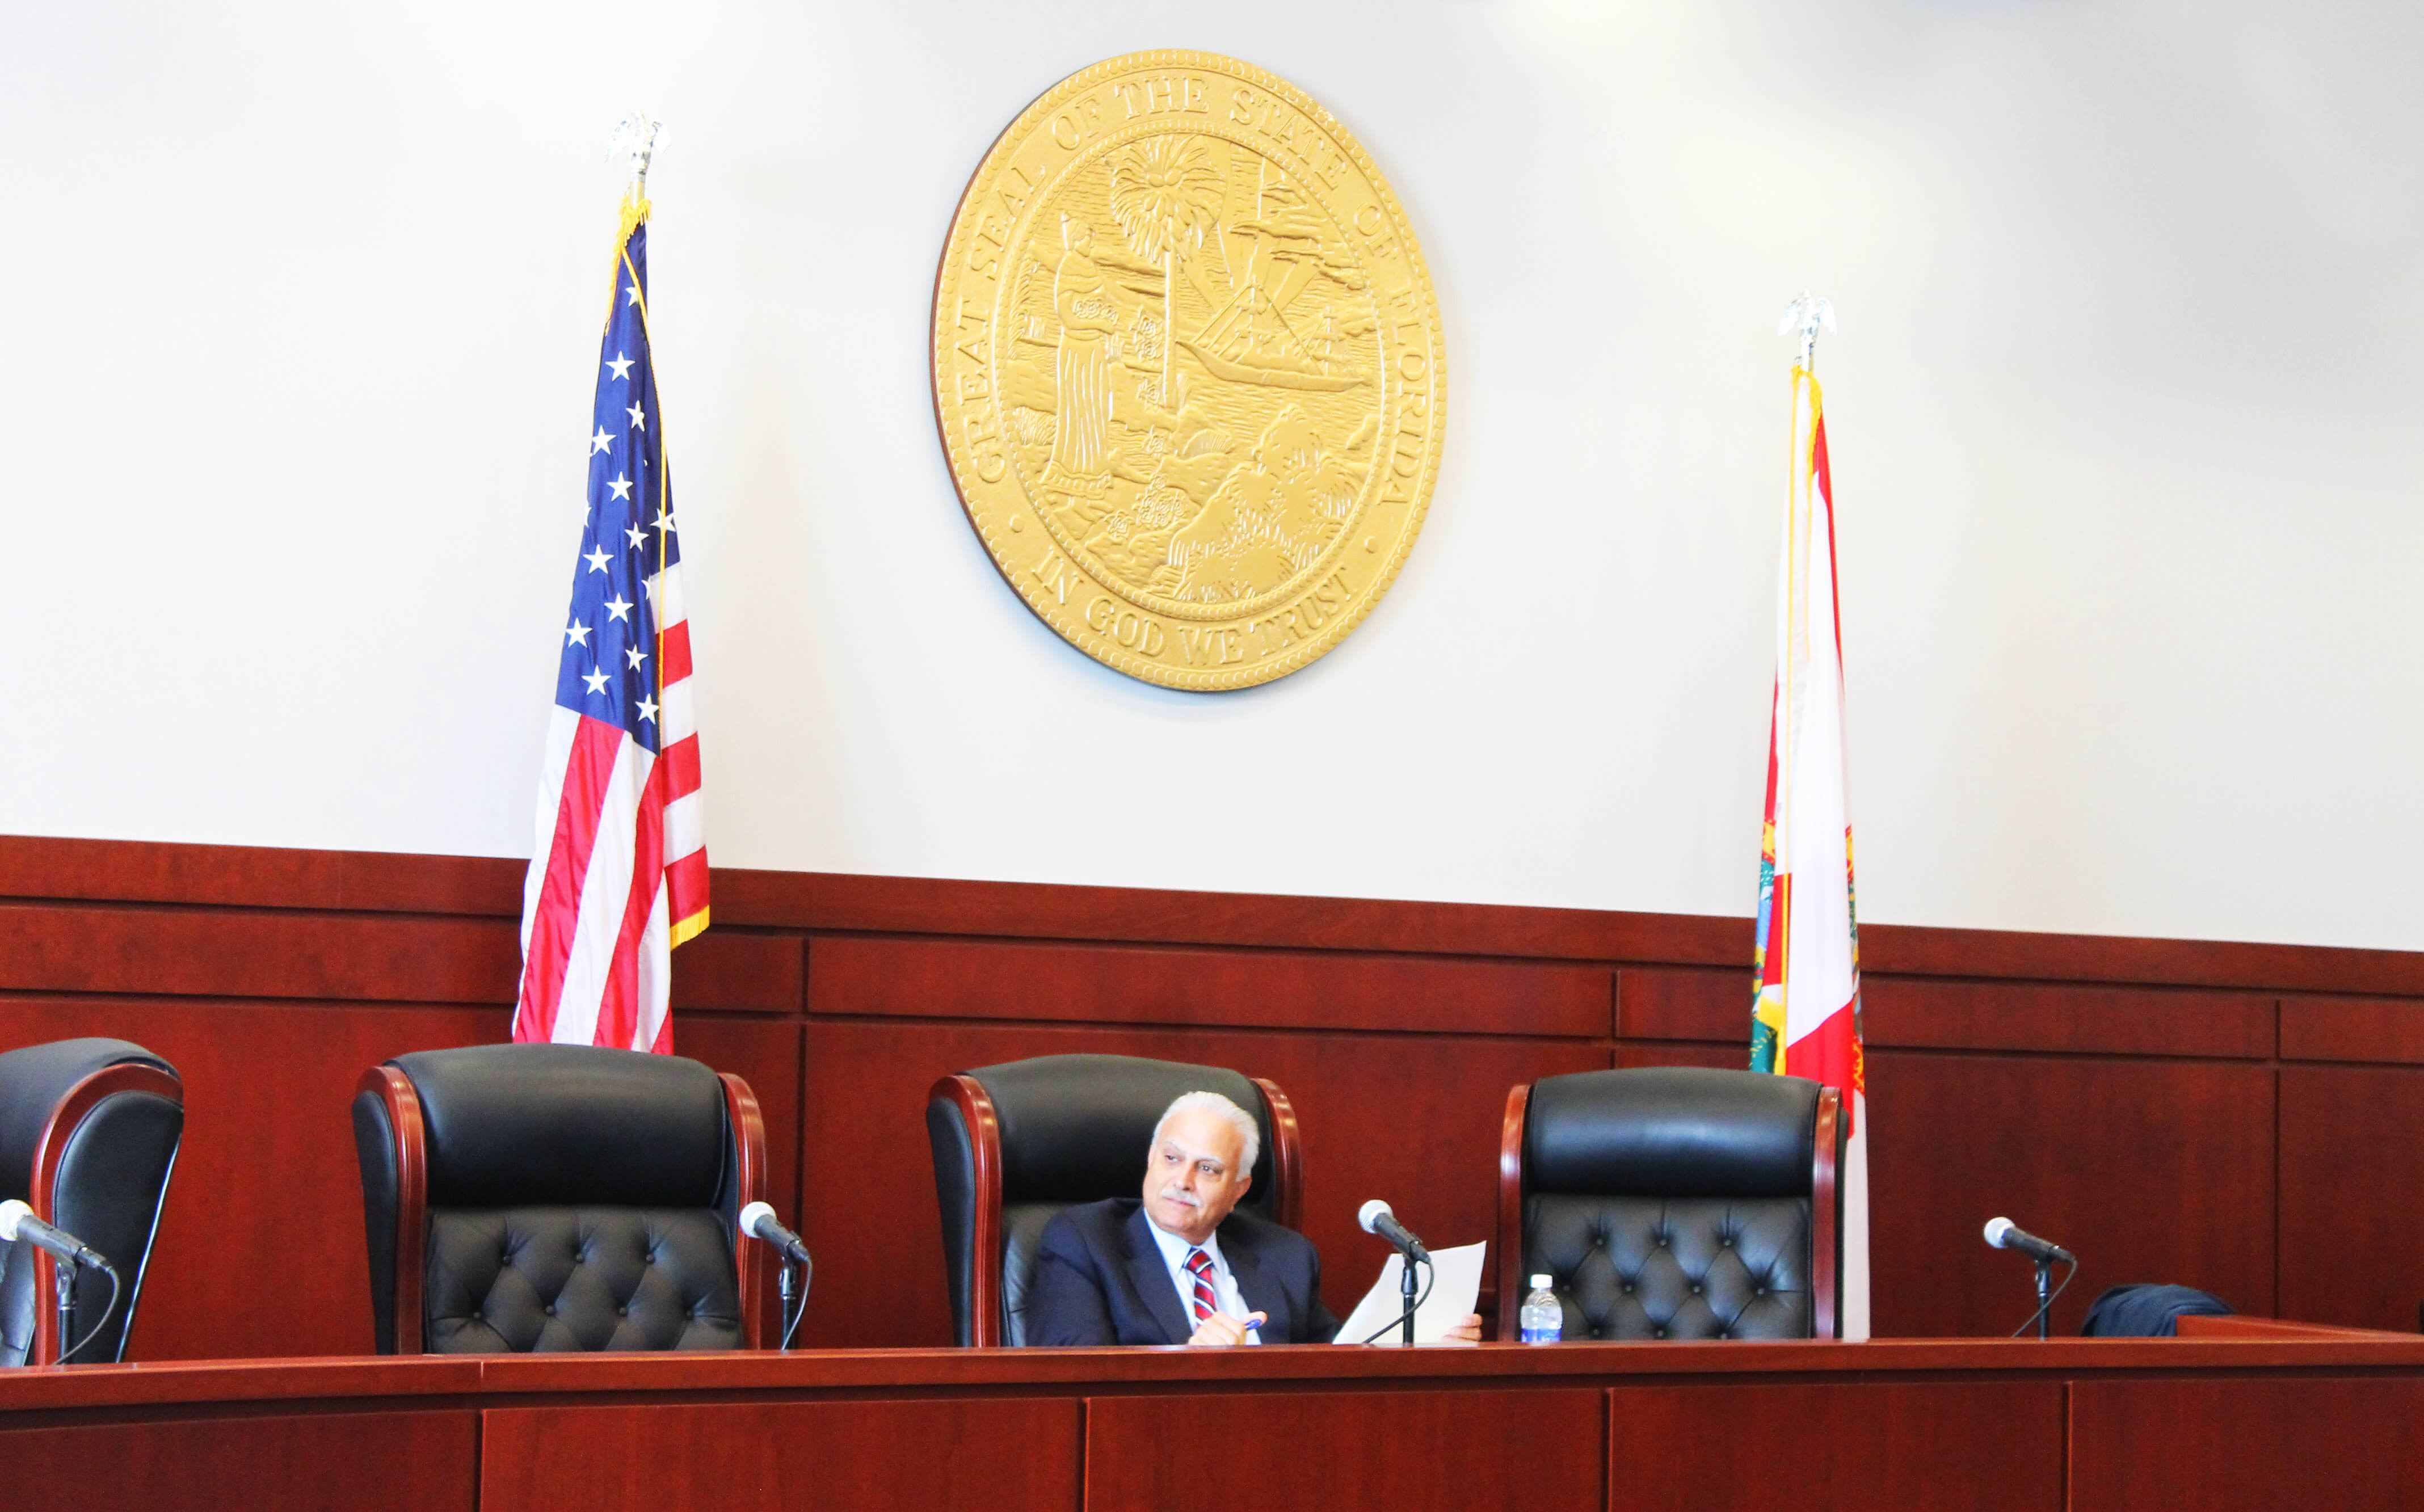 The judge’s bench in florida